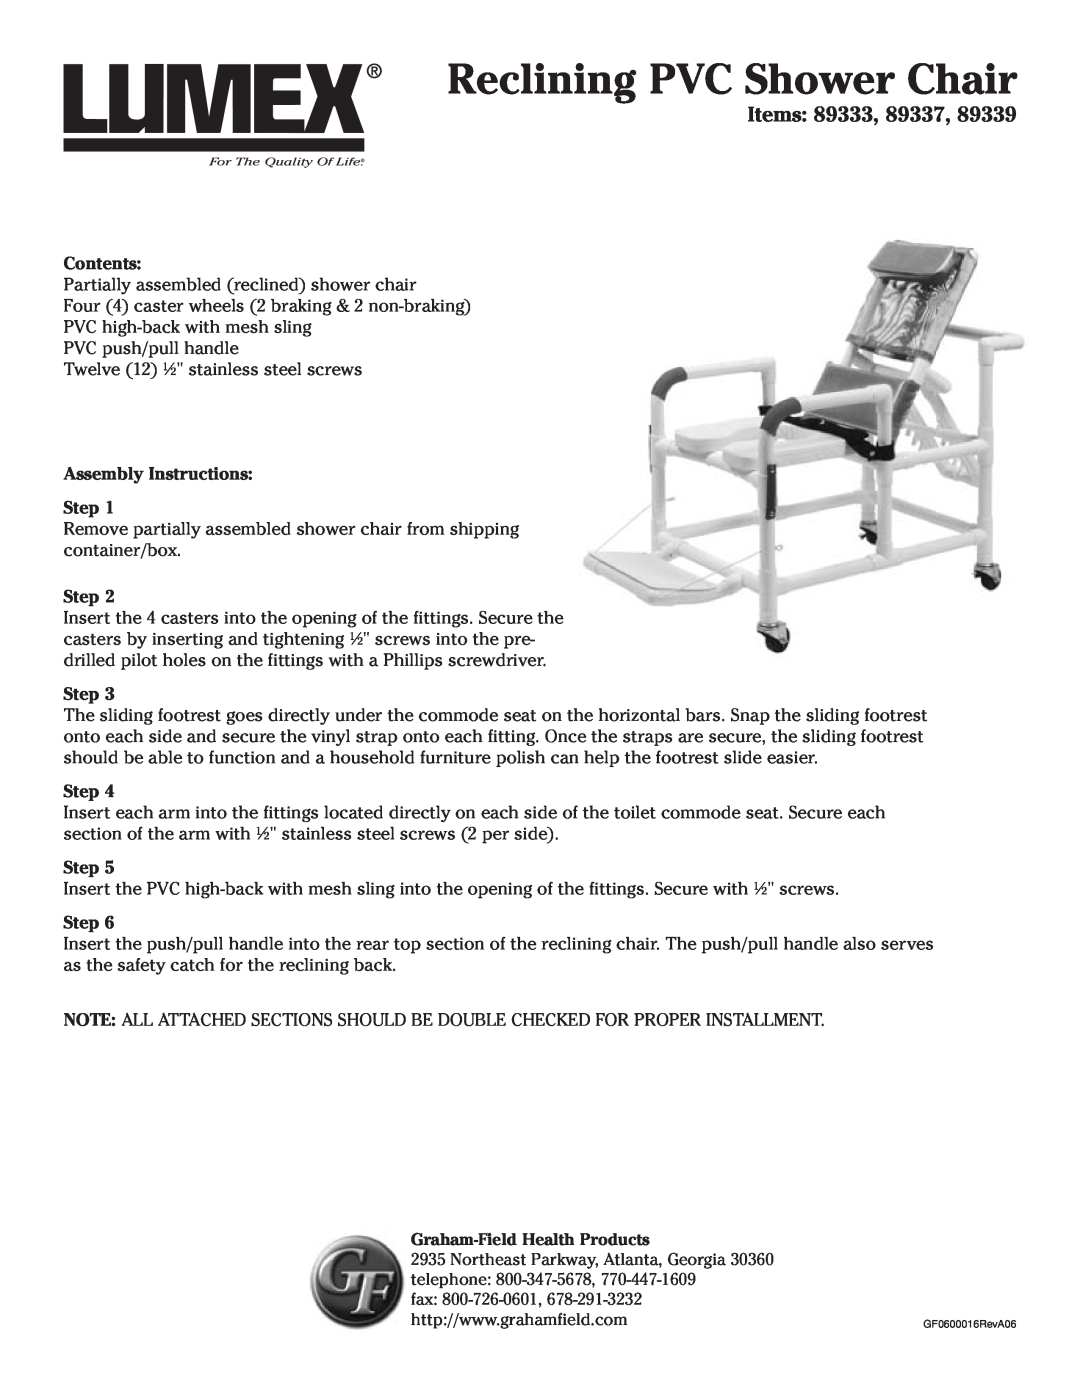 Lumex Syatems 89339 manual Reclining PVC Shower Chair, Items 89333, 89337, Contents, Assembly Instructions Step 